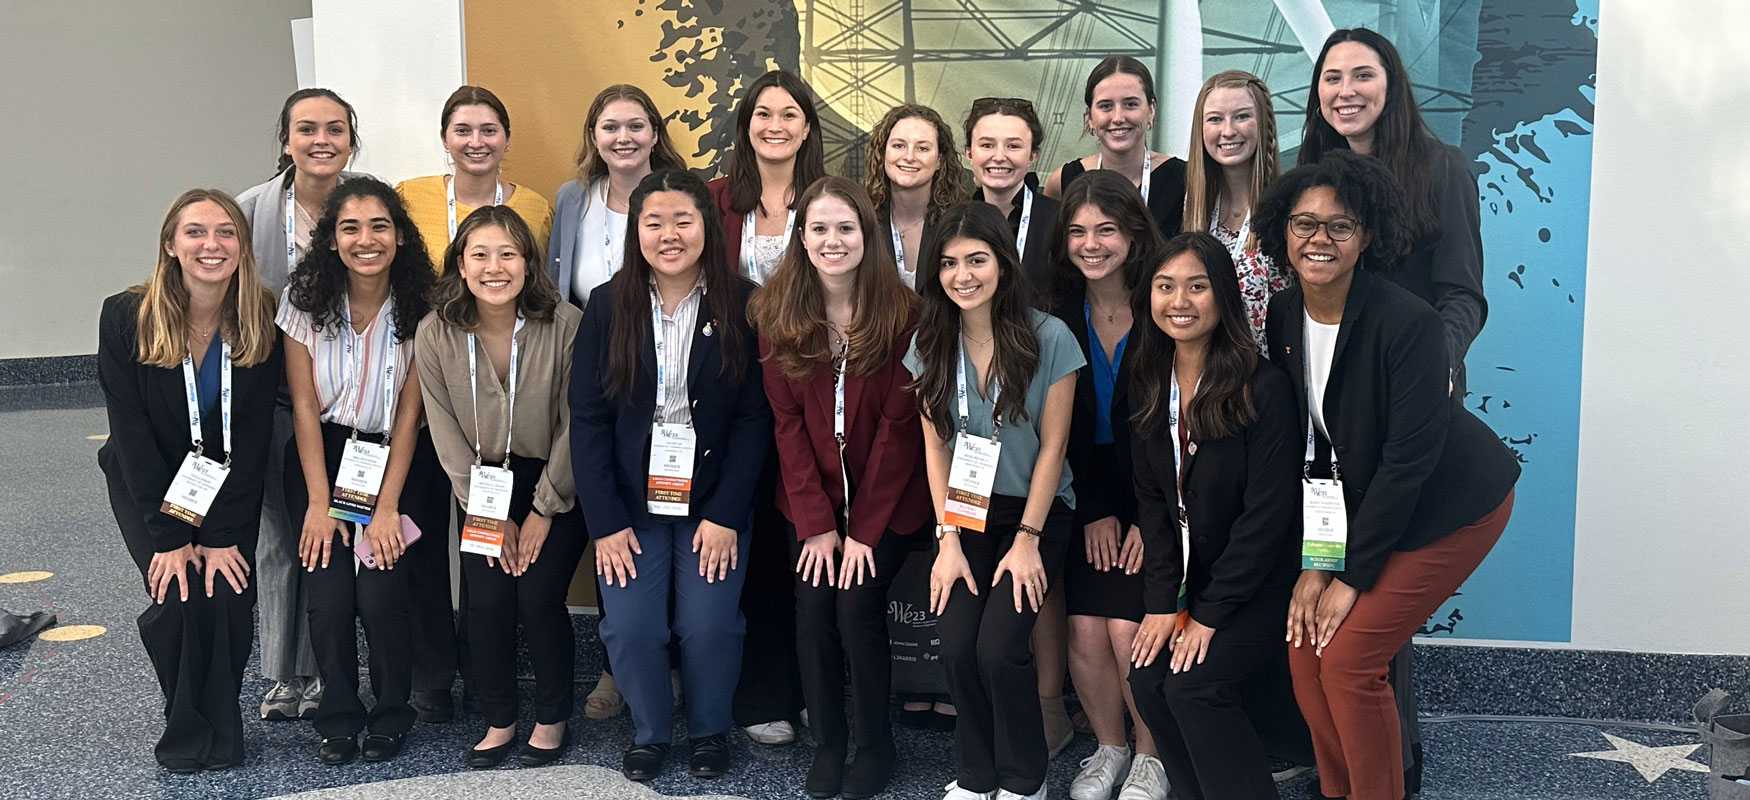 Students in the Society of Women Engineers (SWE) posing for photo at WE23 National Conference